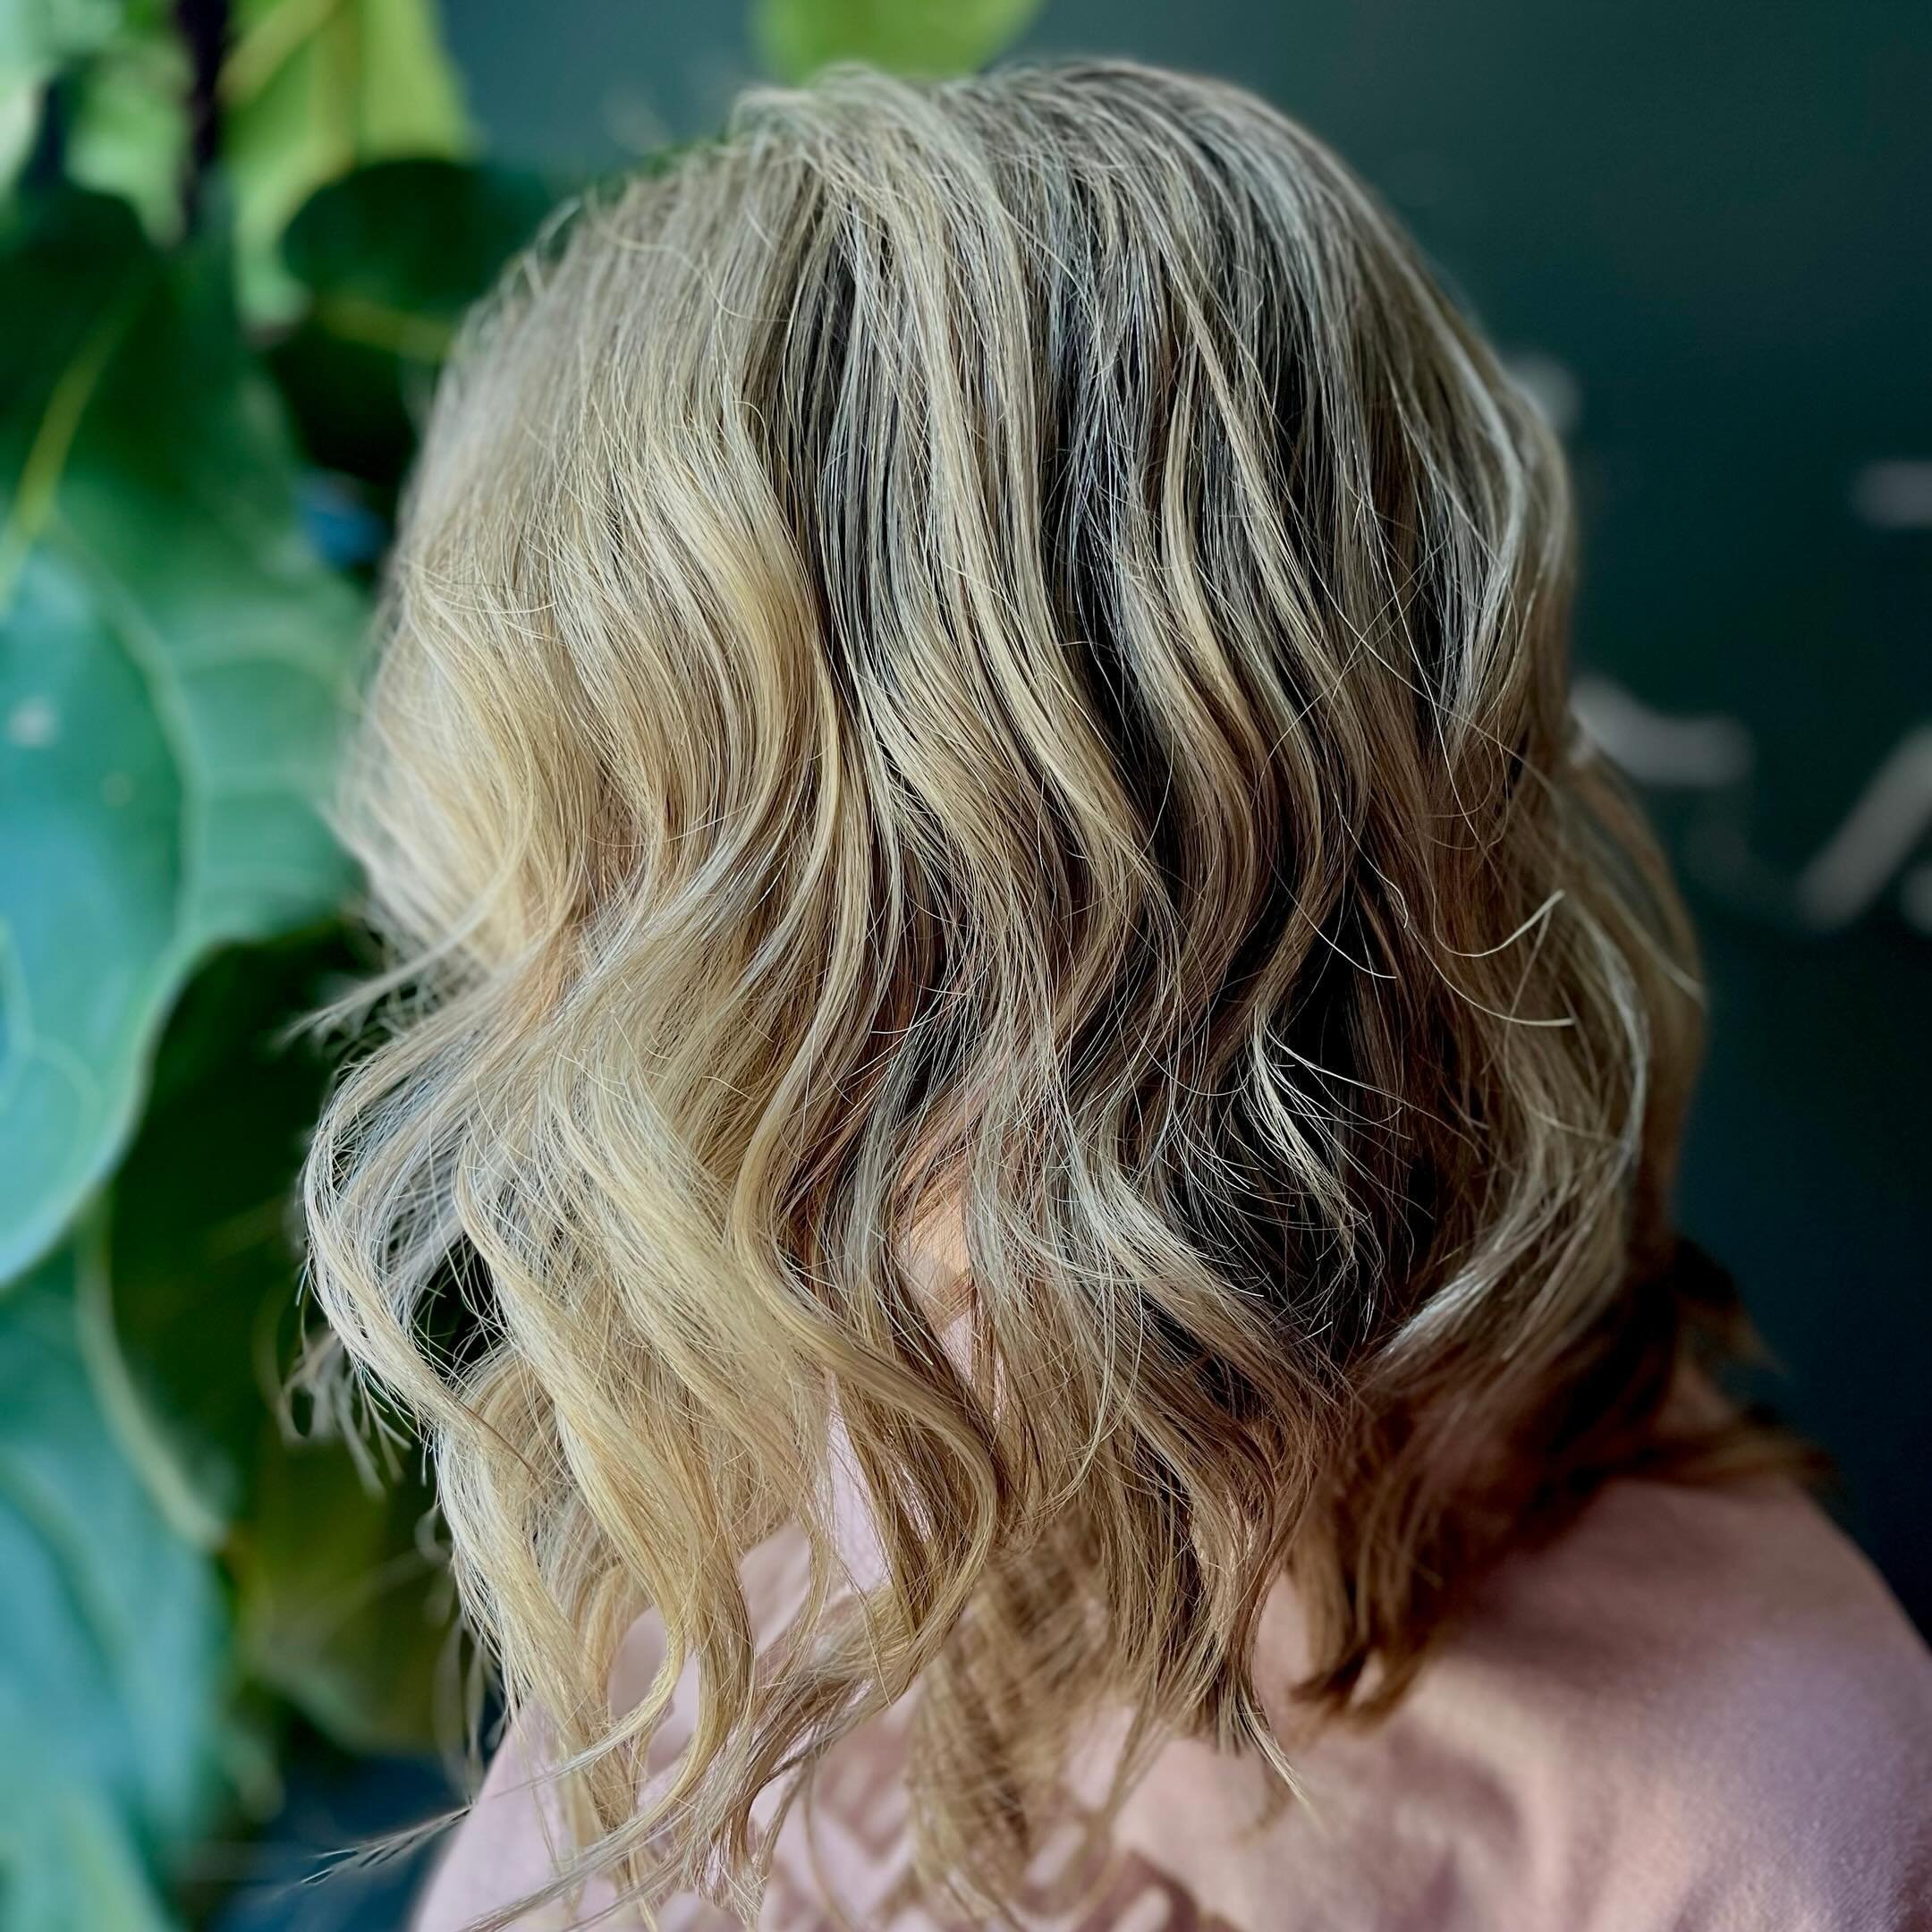 #hairinspo⁠
⁠
Seamless  grow out with #livedin full highlights by @moxiemiller_debbieblonding.⁠
⁠
Book NOW! Link in BIO ⬆️ to secure your April spot and the chance to save 10% off your service.⁠
⁠
#moxiemiller⁠
#havealittlemoxie⁠
#hairgoals⁠
#haircut